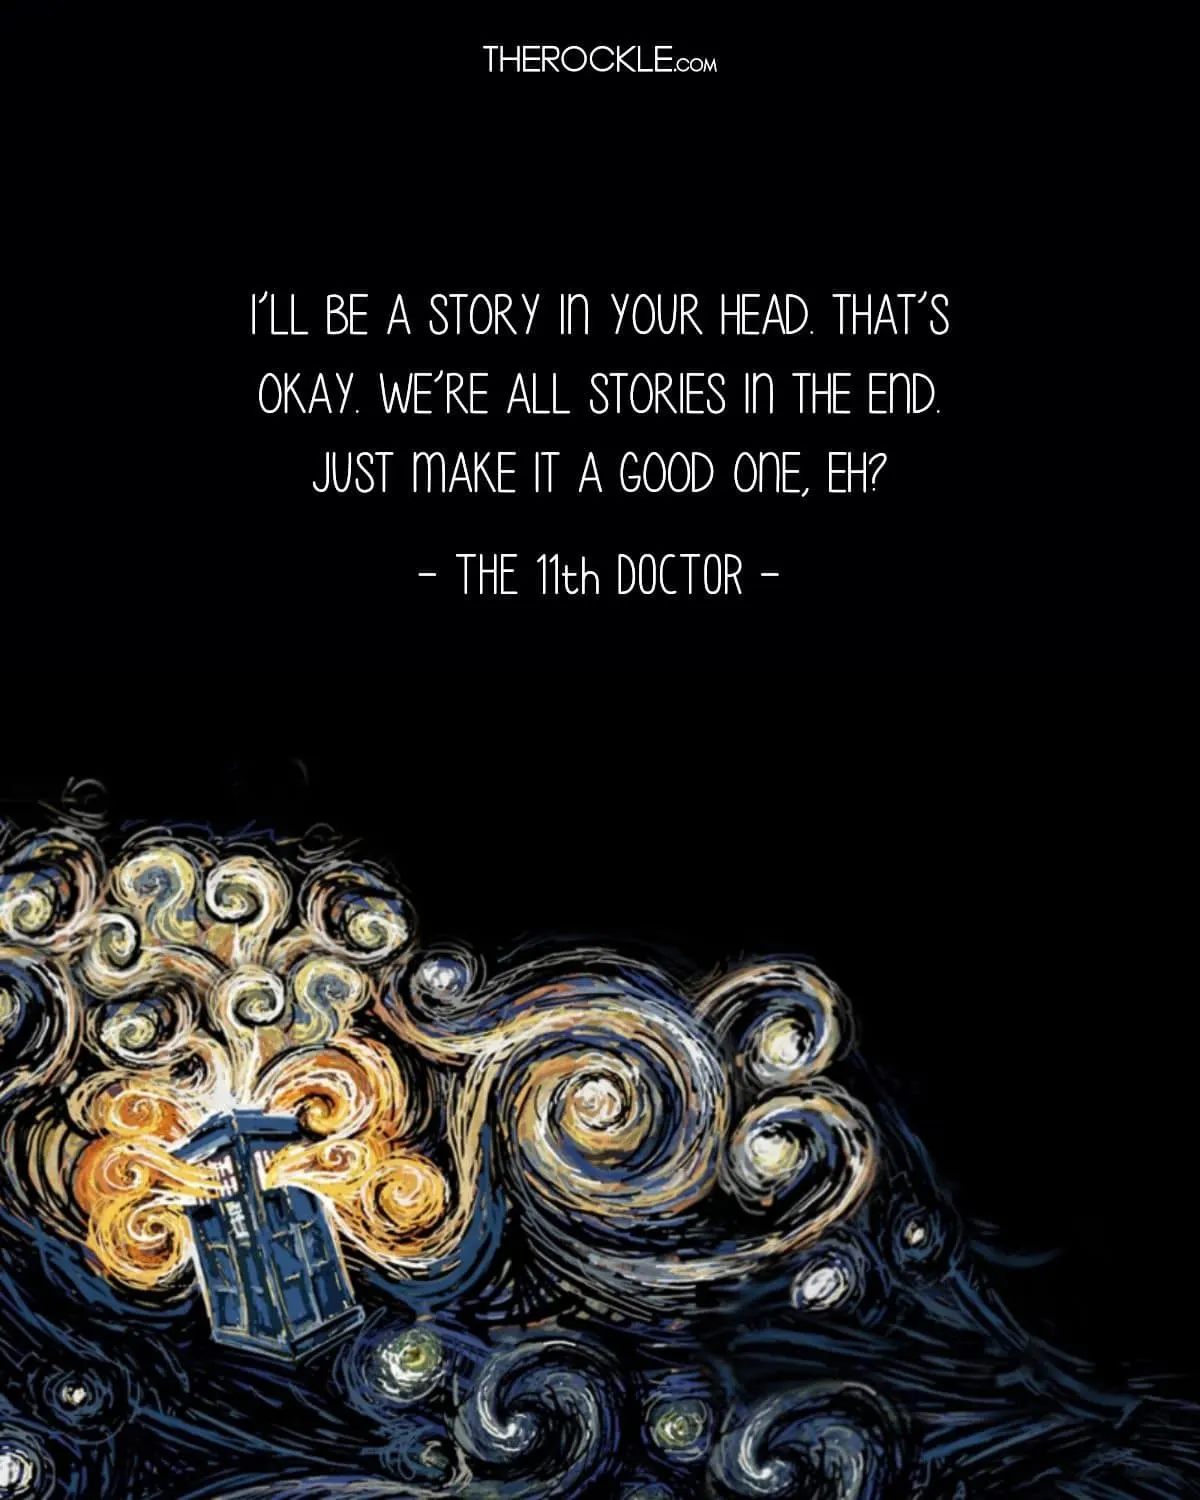 Doctor Who quote on how we are all stories in the end